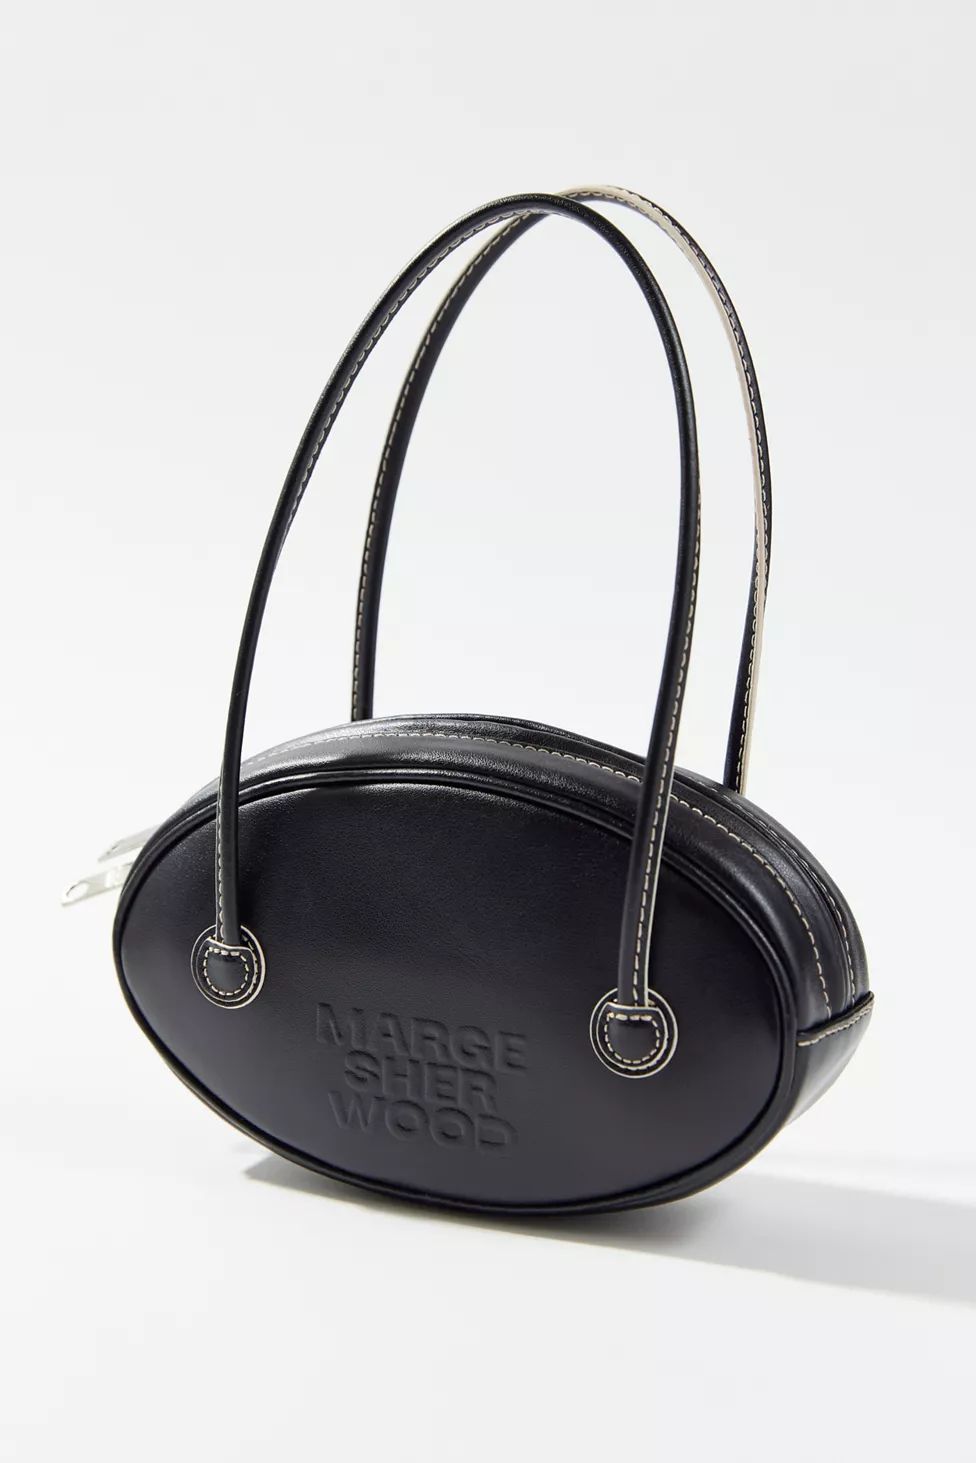 Marge Sherwood Leather Egg Bag | Urban Outfitters (US and RoW)